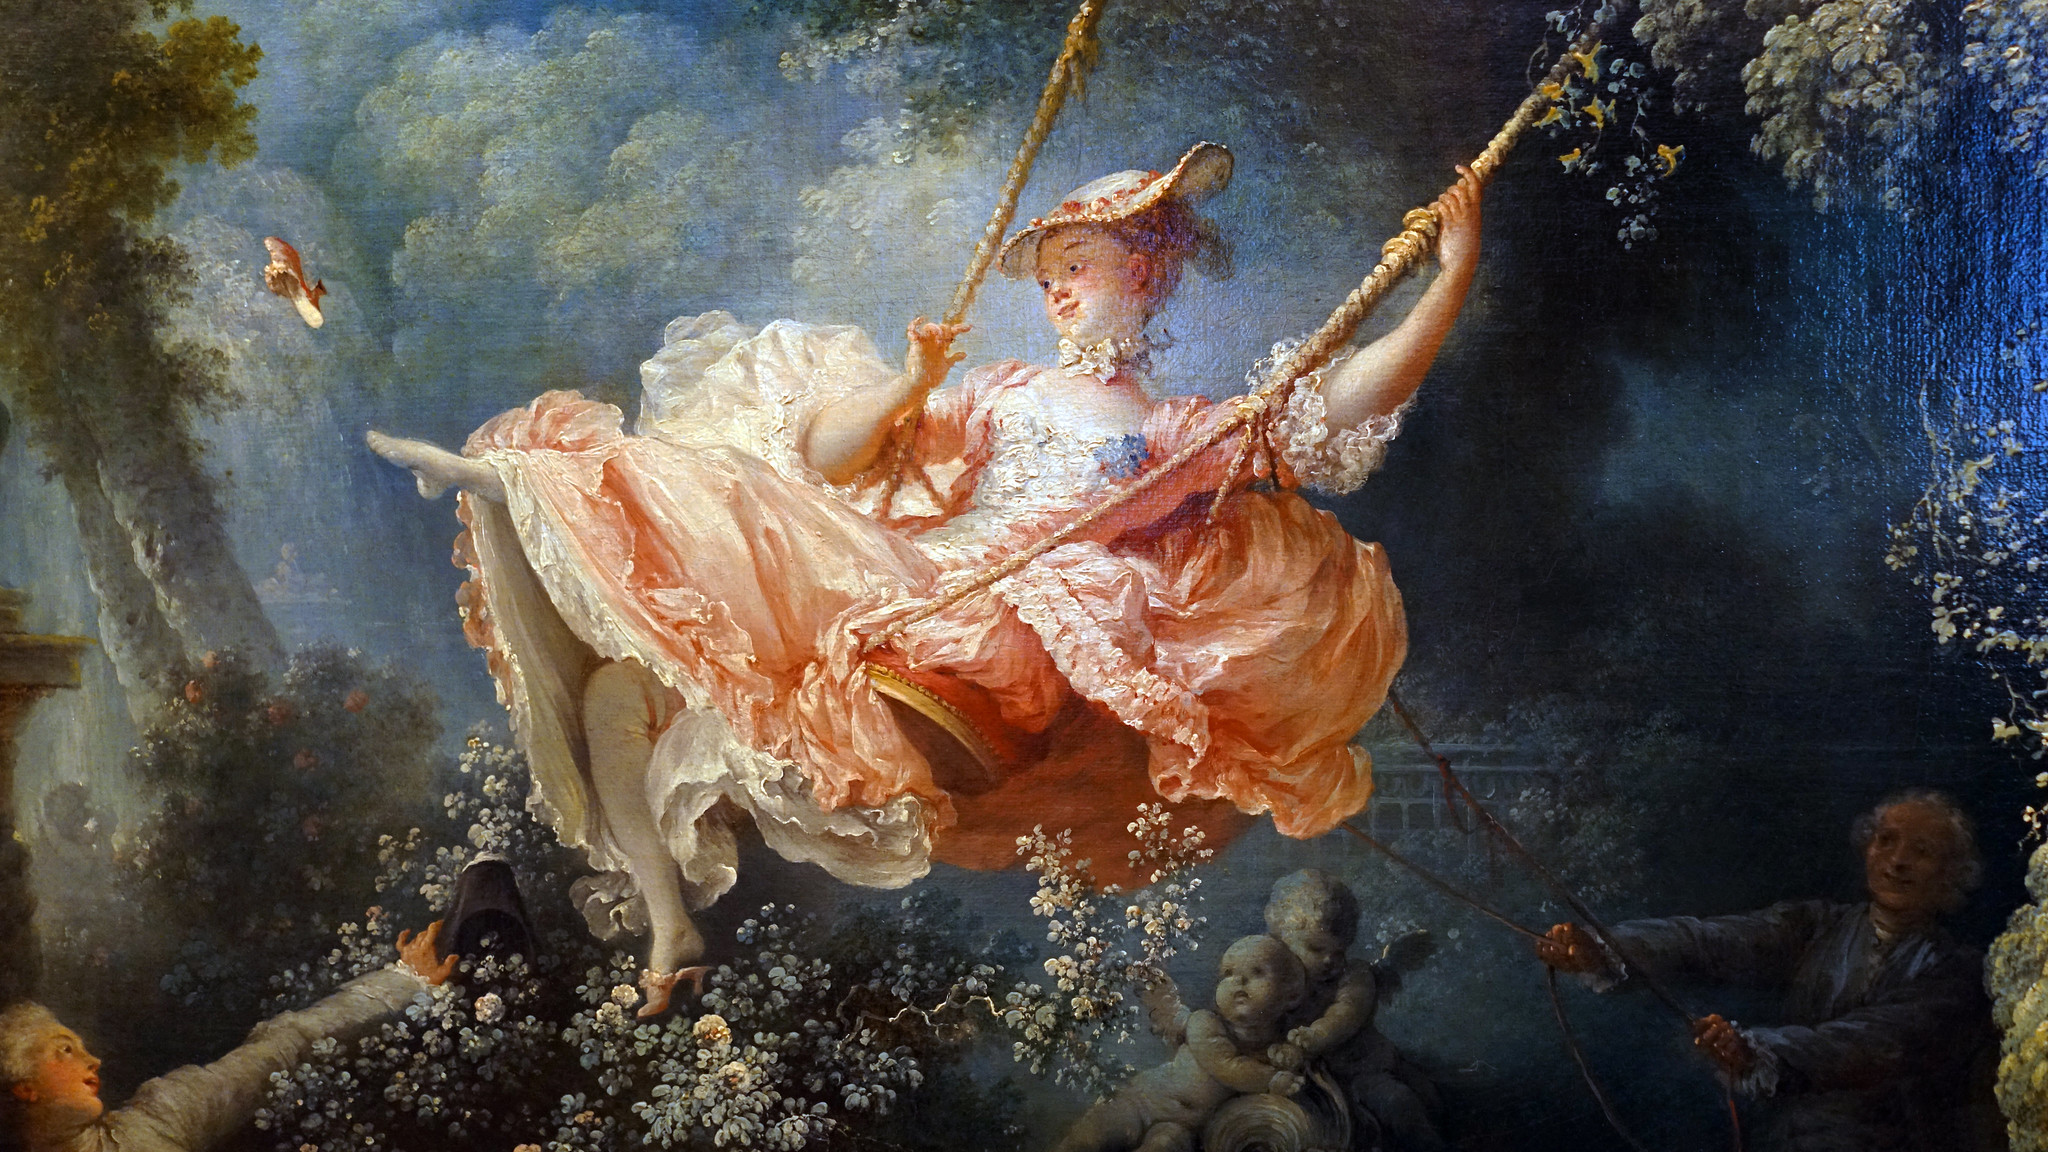 Jean-Honoré Fragonard, The Swing, c. 1767, Wallace Collection, London, UK. Detail.